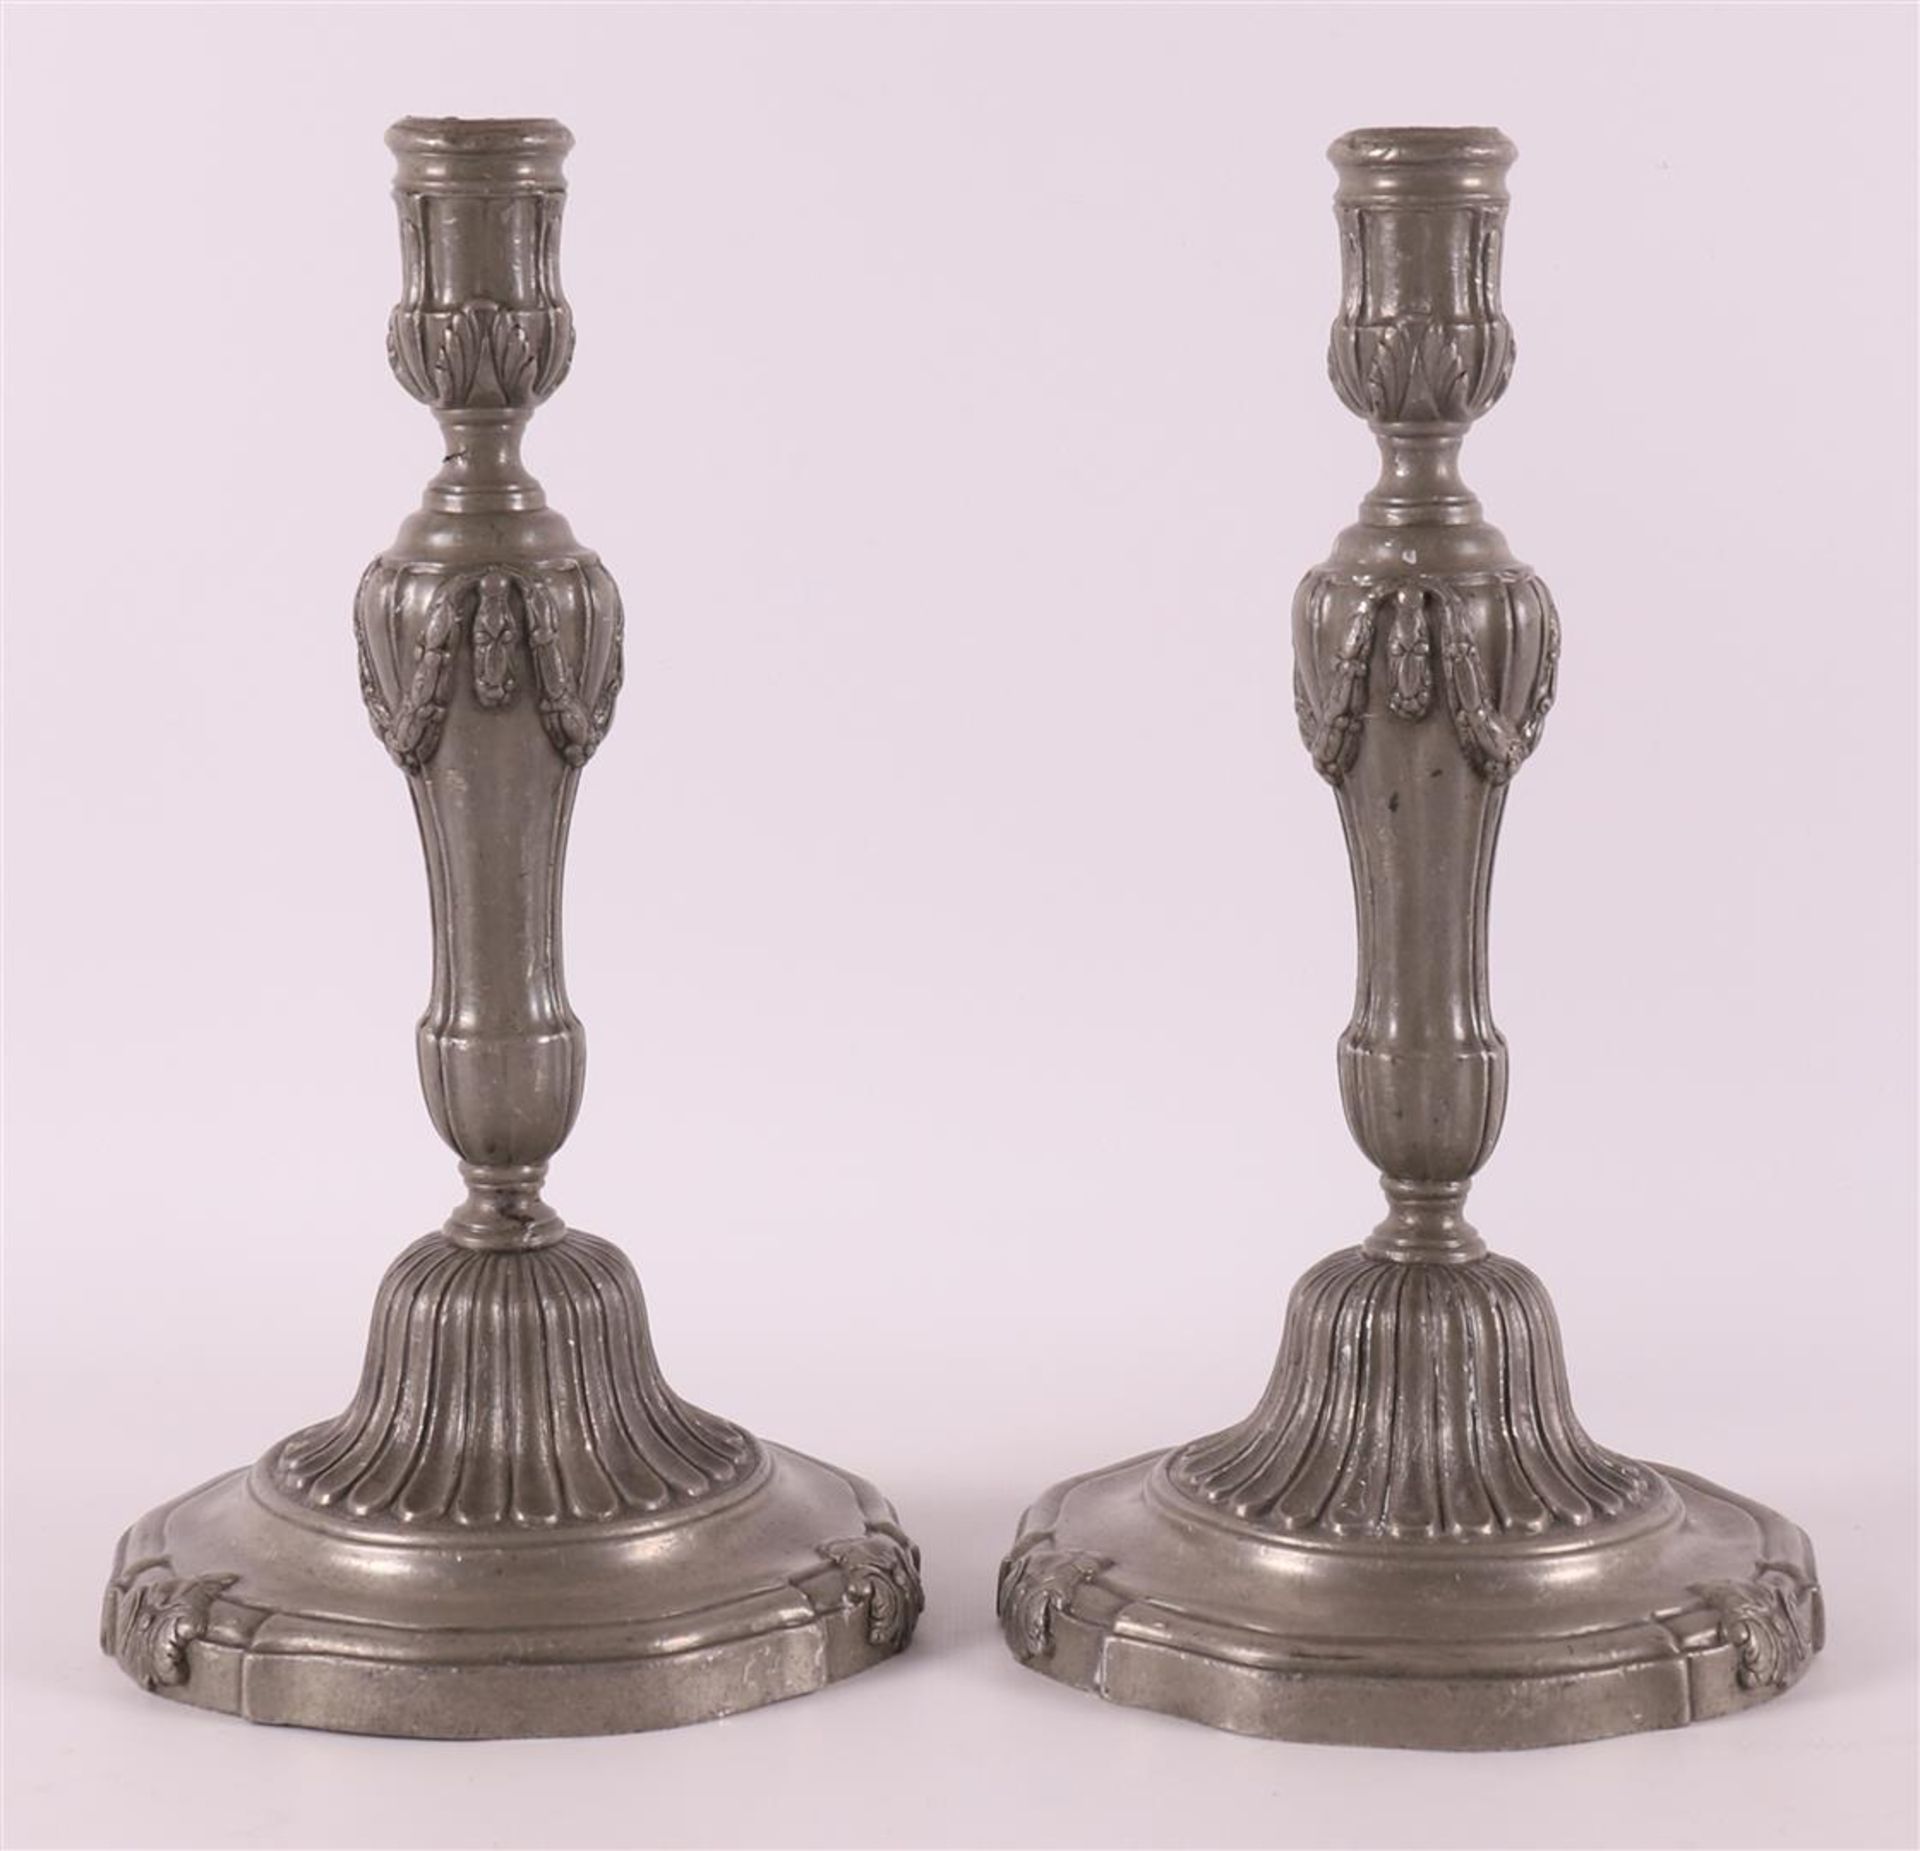 A pair of plain pewter one-light candlesticks, Louis XVI style, 19th century.